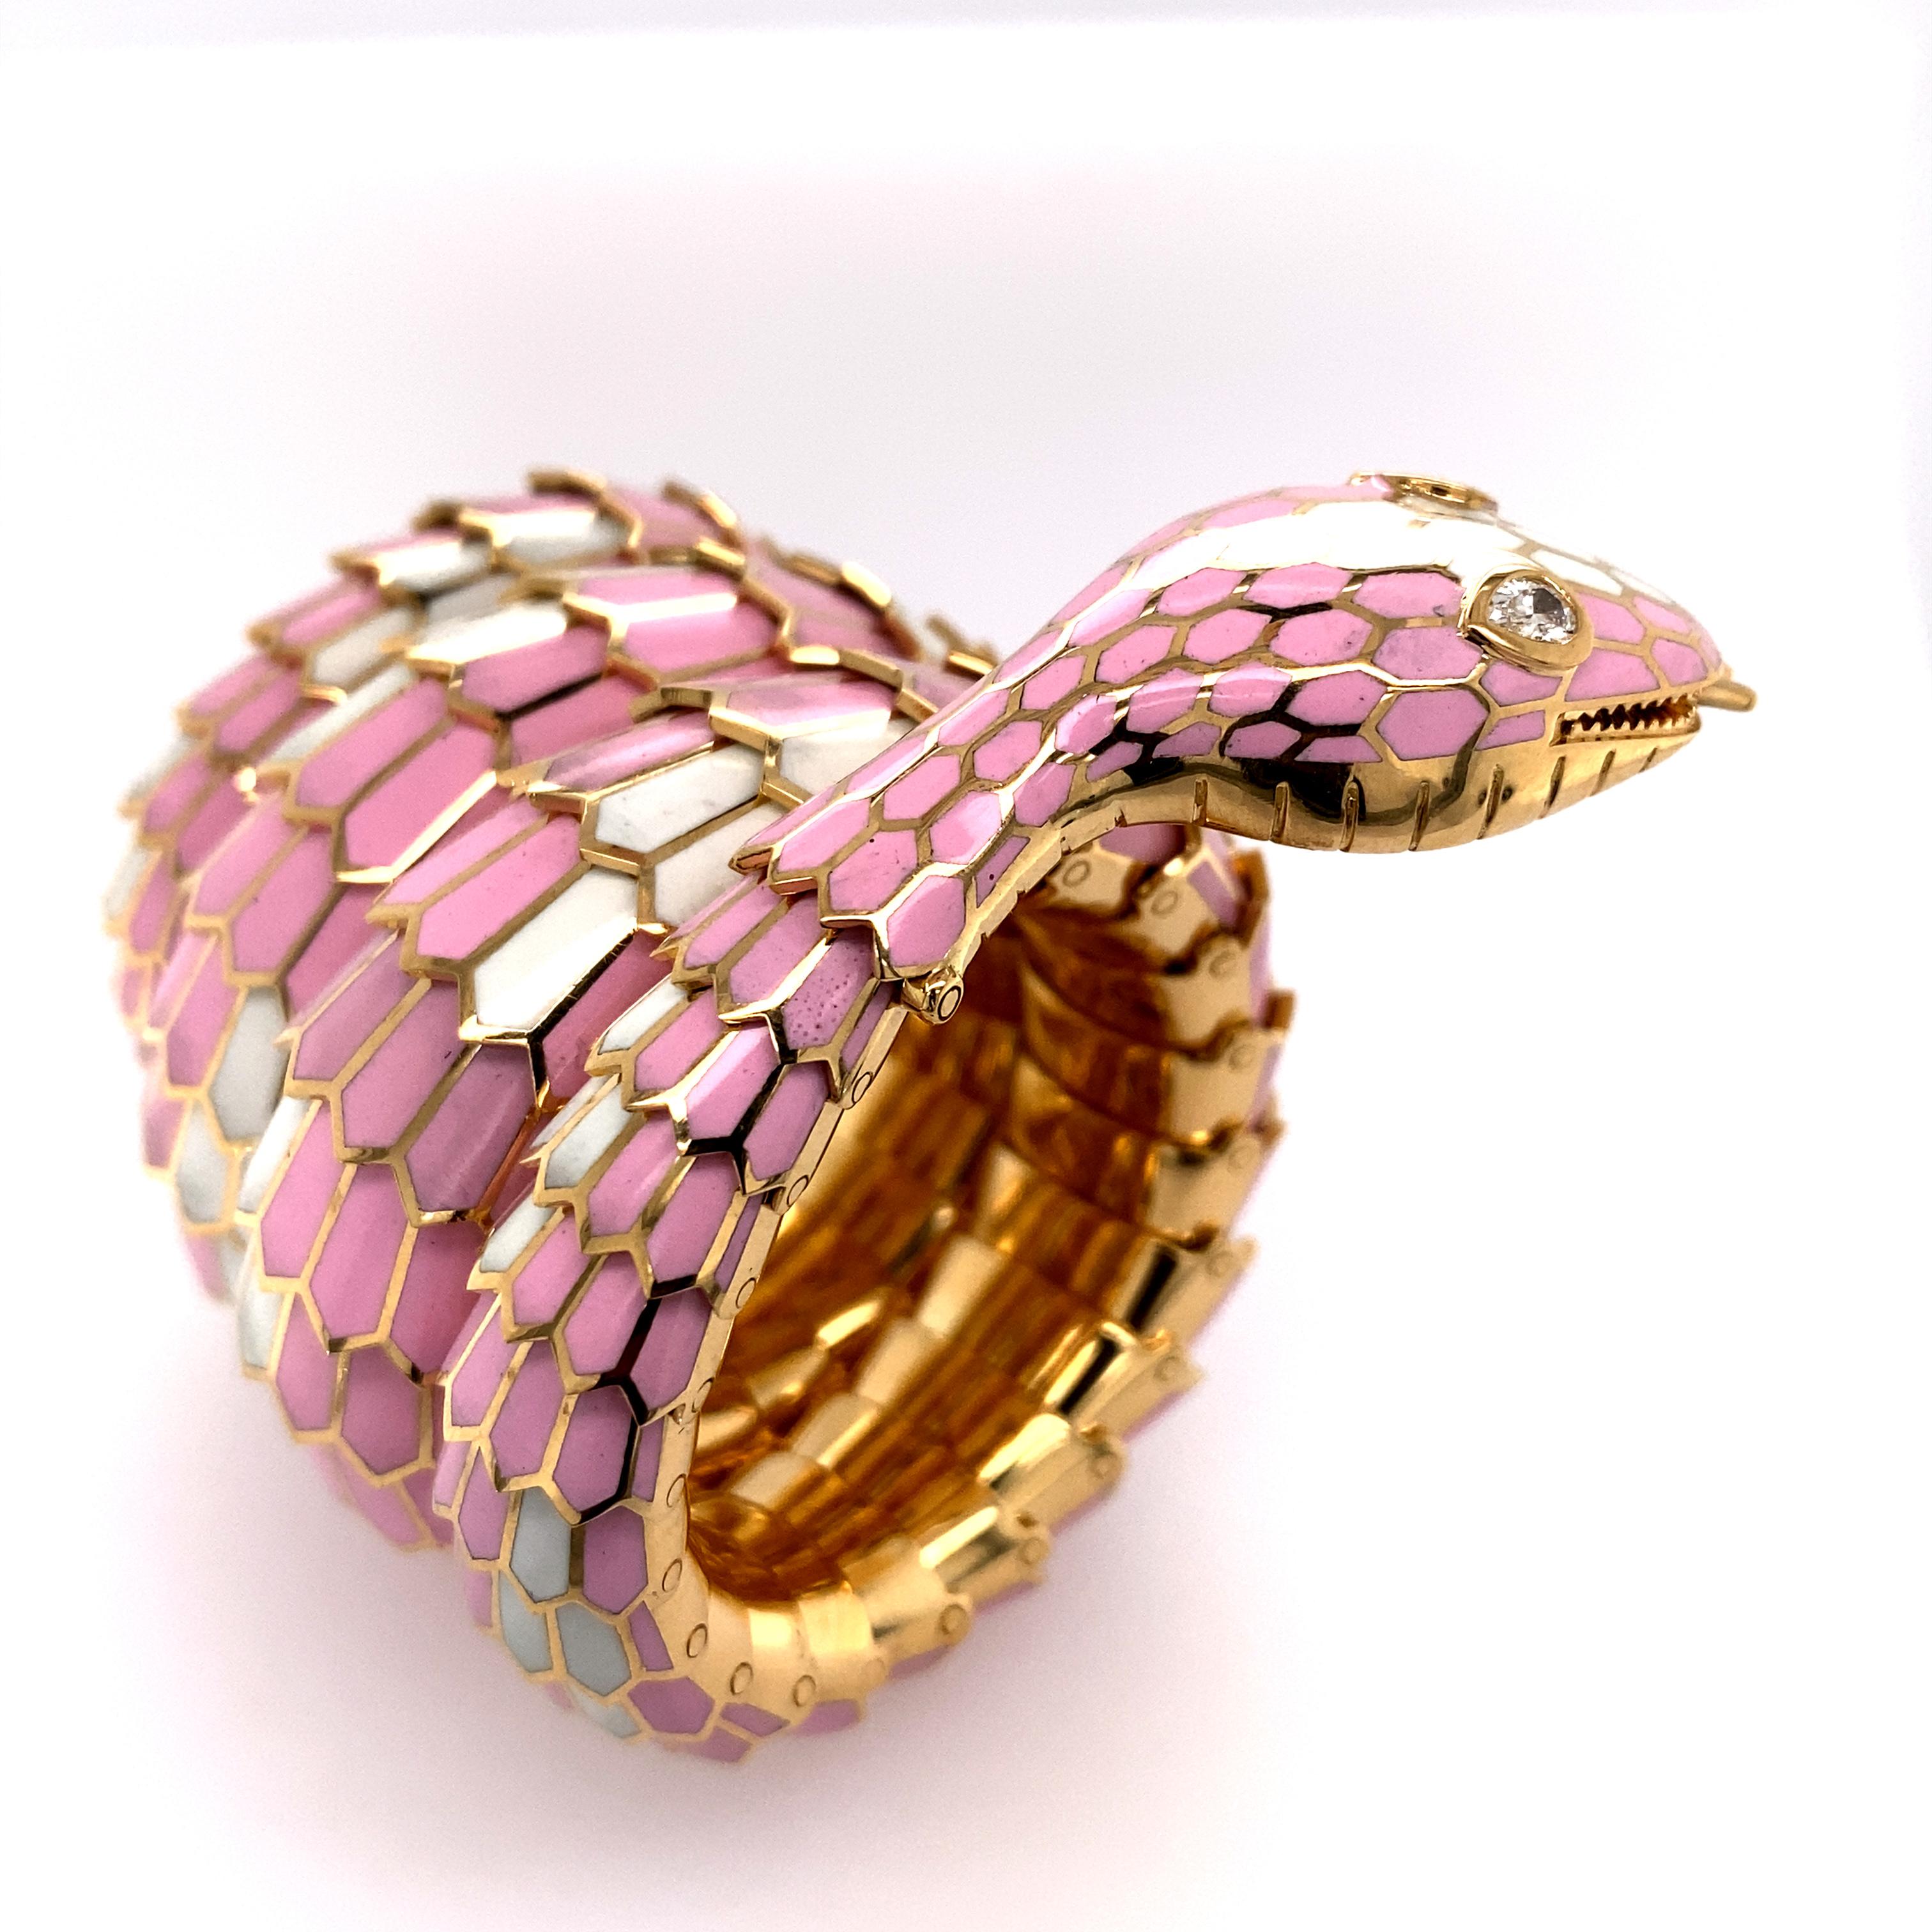 Amazing solid 18k gold serpentine bracelet with pear shape diamond eyes. 
Pink and White enamel, highly flexible and can fit wrists size of 5-7 inches.
In excellent condition. Beautiful Craftsmanship with original box. Maker mark by Illario